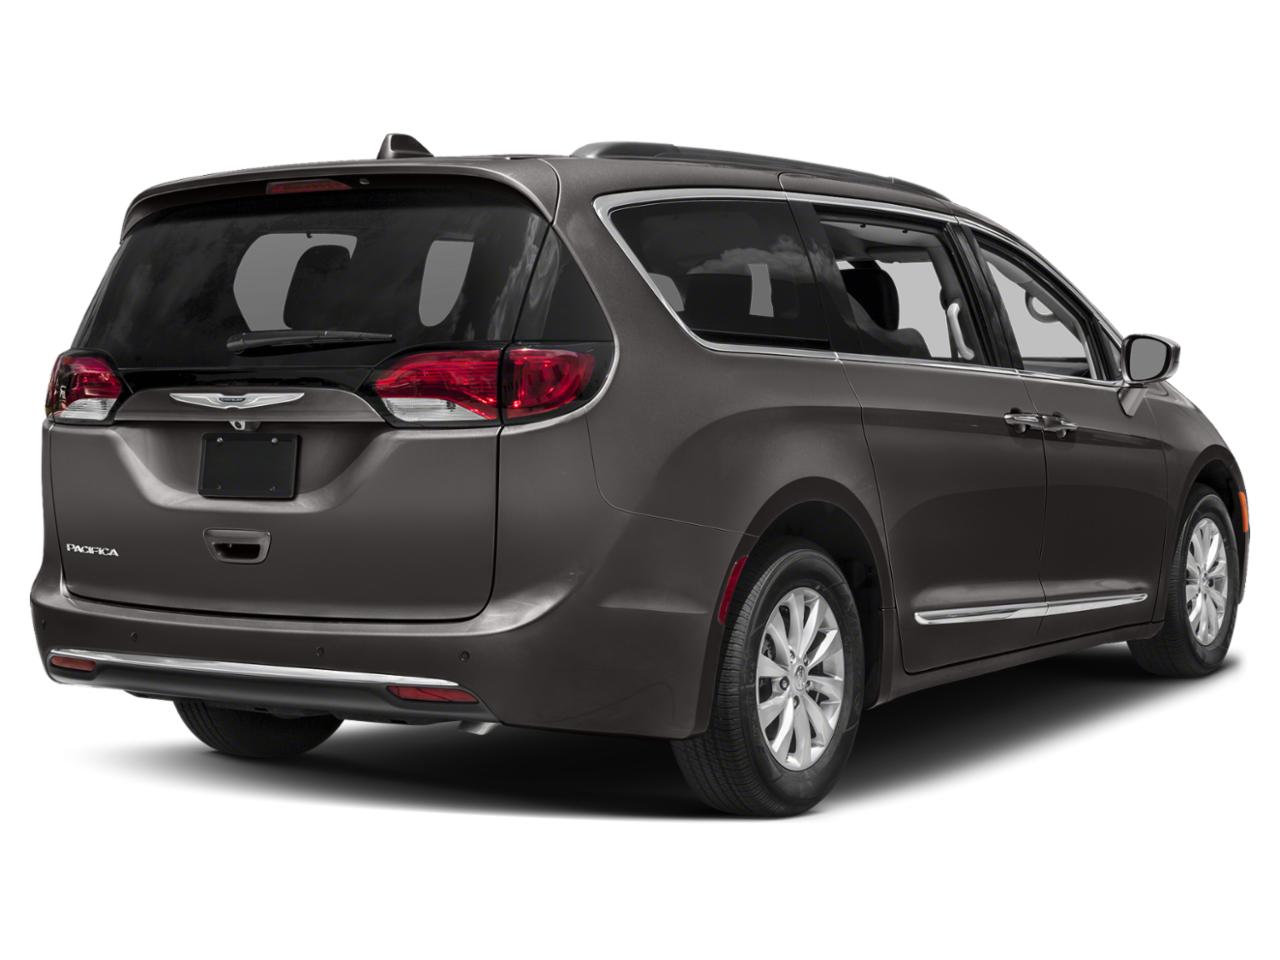 2019 Chrysler Pacifica Vehicle Photo in Ft. Myers, FL 33907